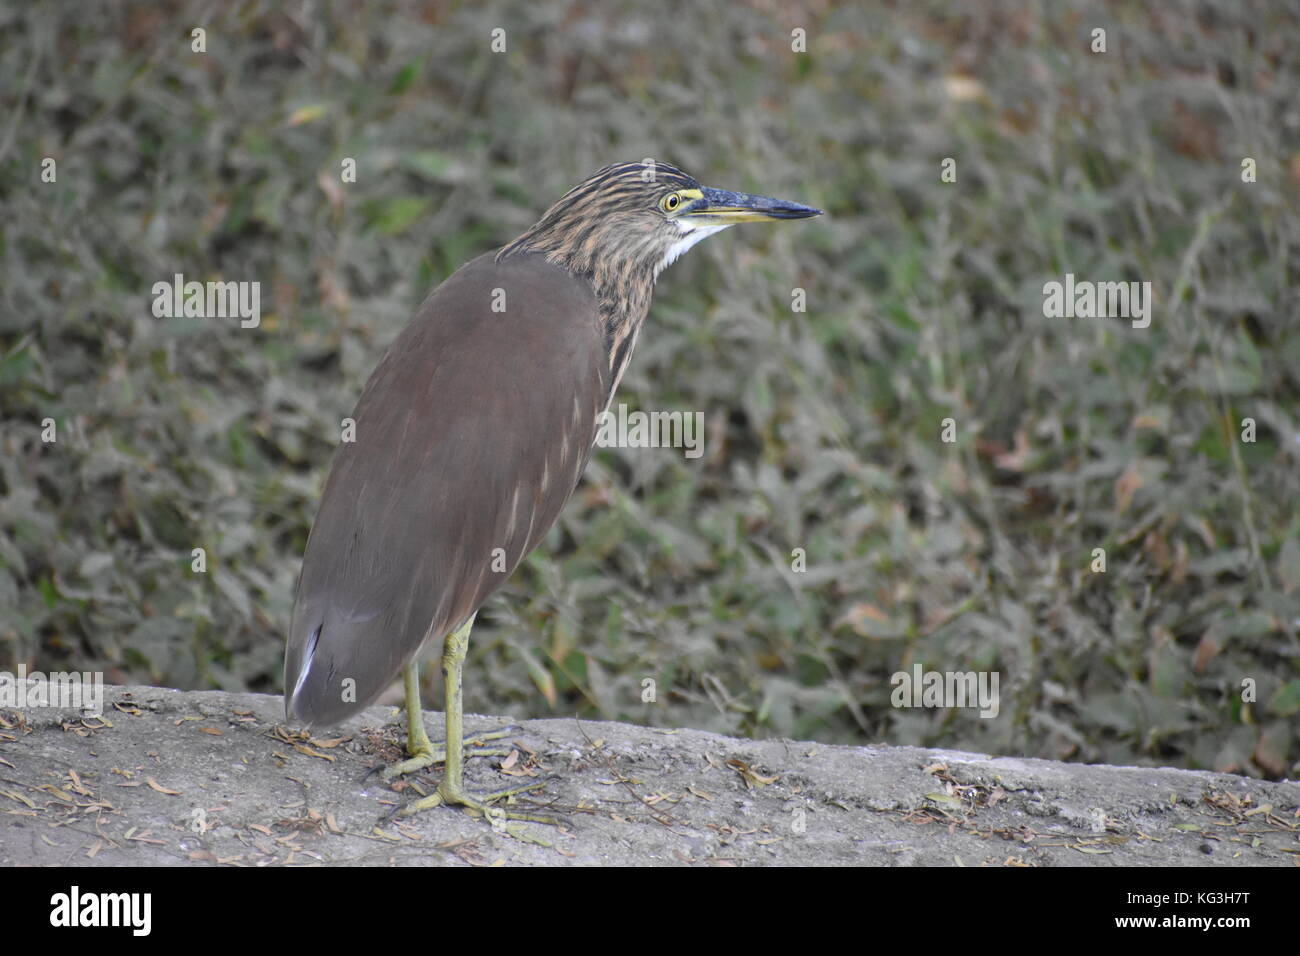 Short-Necked Heron spotted in New Delhi. Often in shaded areas along edges of ponds, walking on fallen logs and branches Stock Photo